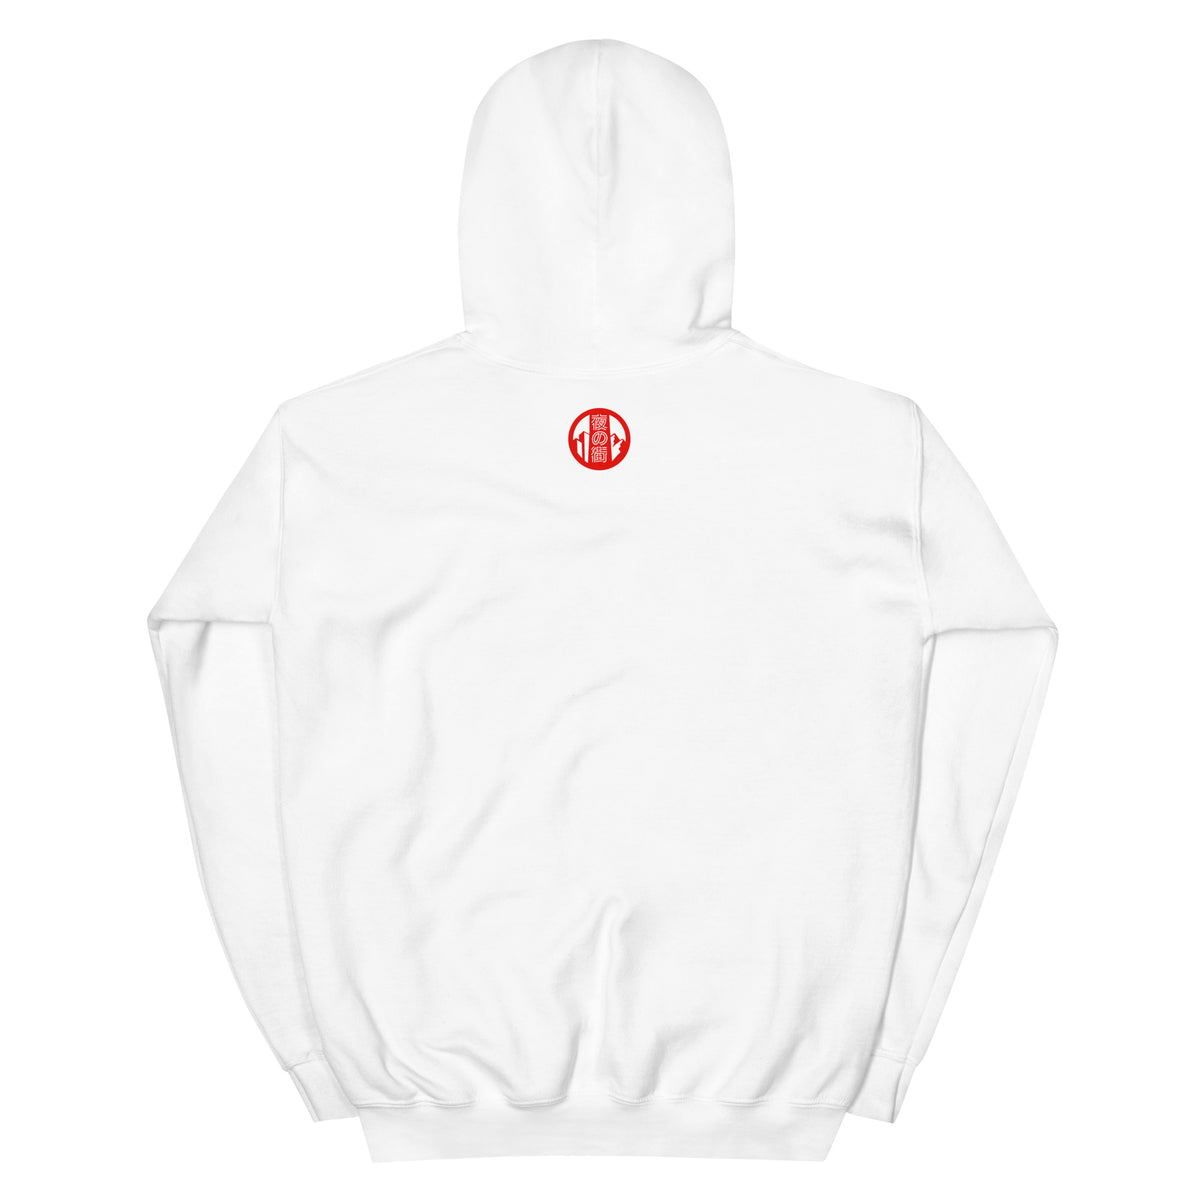 Ice Cold Hoodie (White)